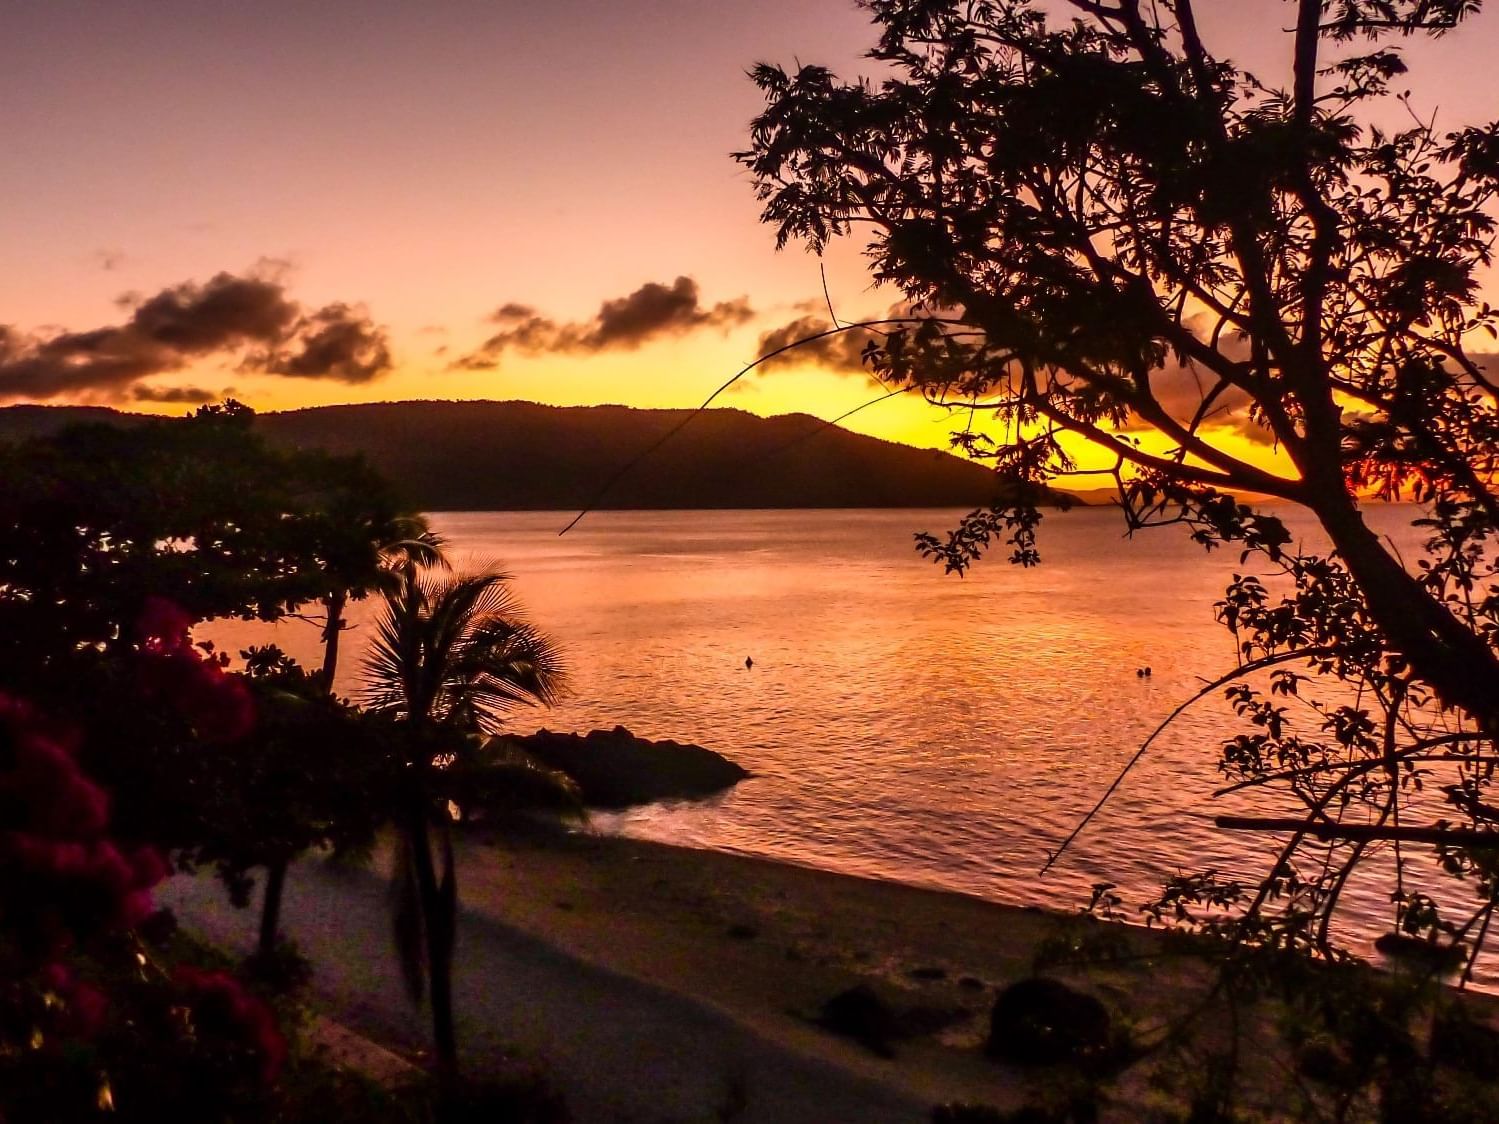 View of the sunset from Daydream Island Resort